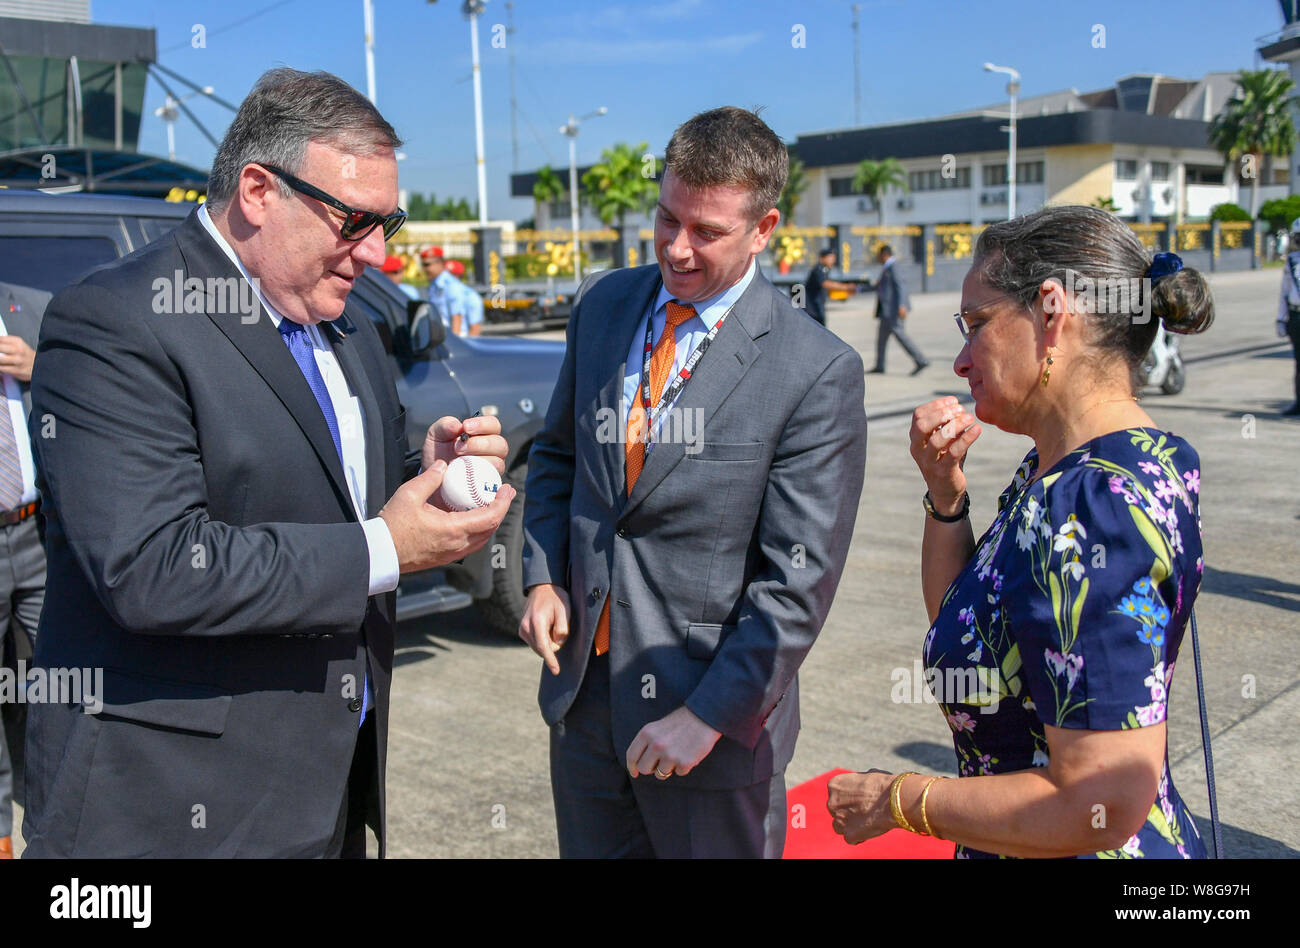 Secretary of State Michael R. Pompeo signs a baseball prior to his departure from Kuala Lumpur, Malaysia, August 3, 2018. Stock Photo